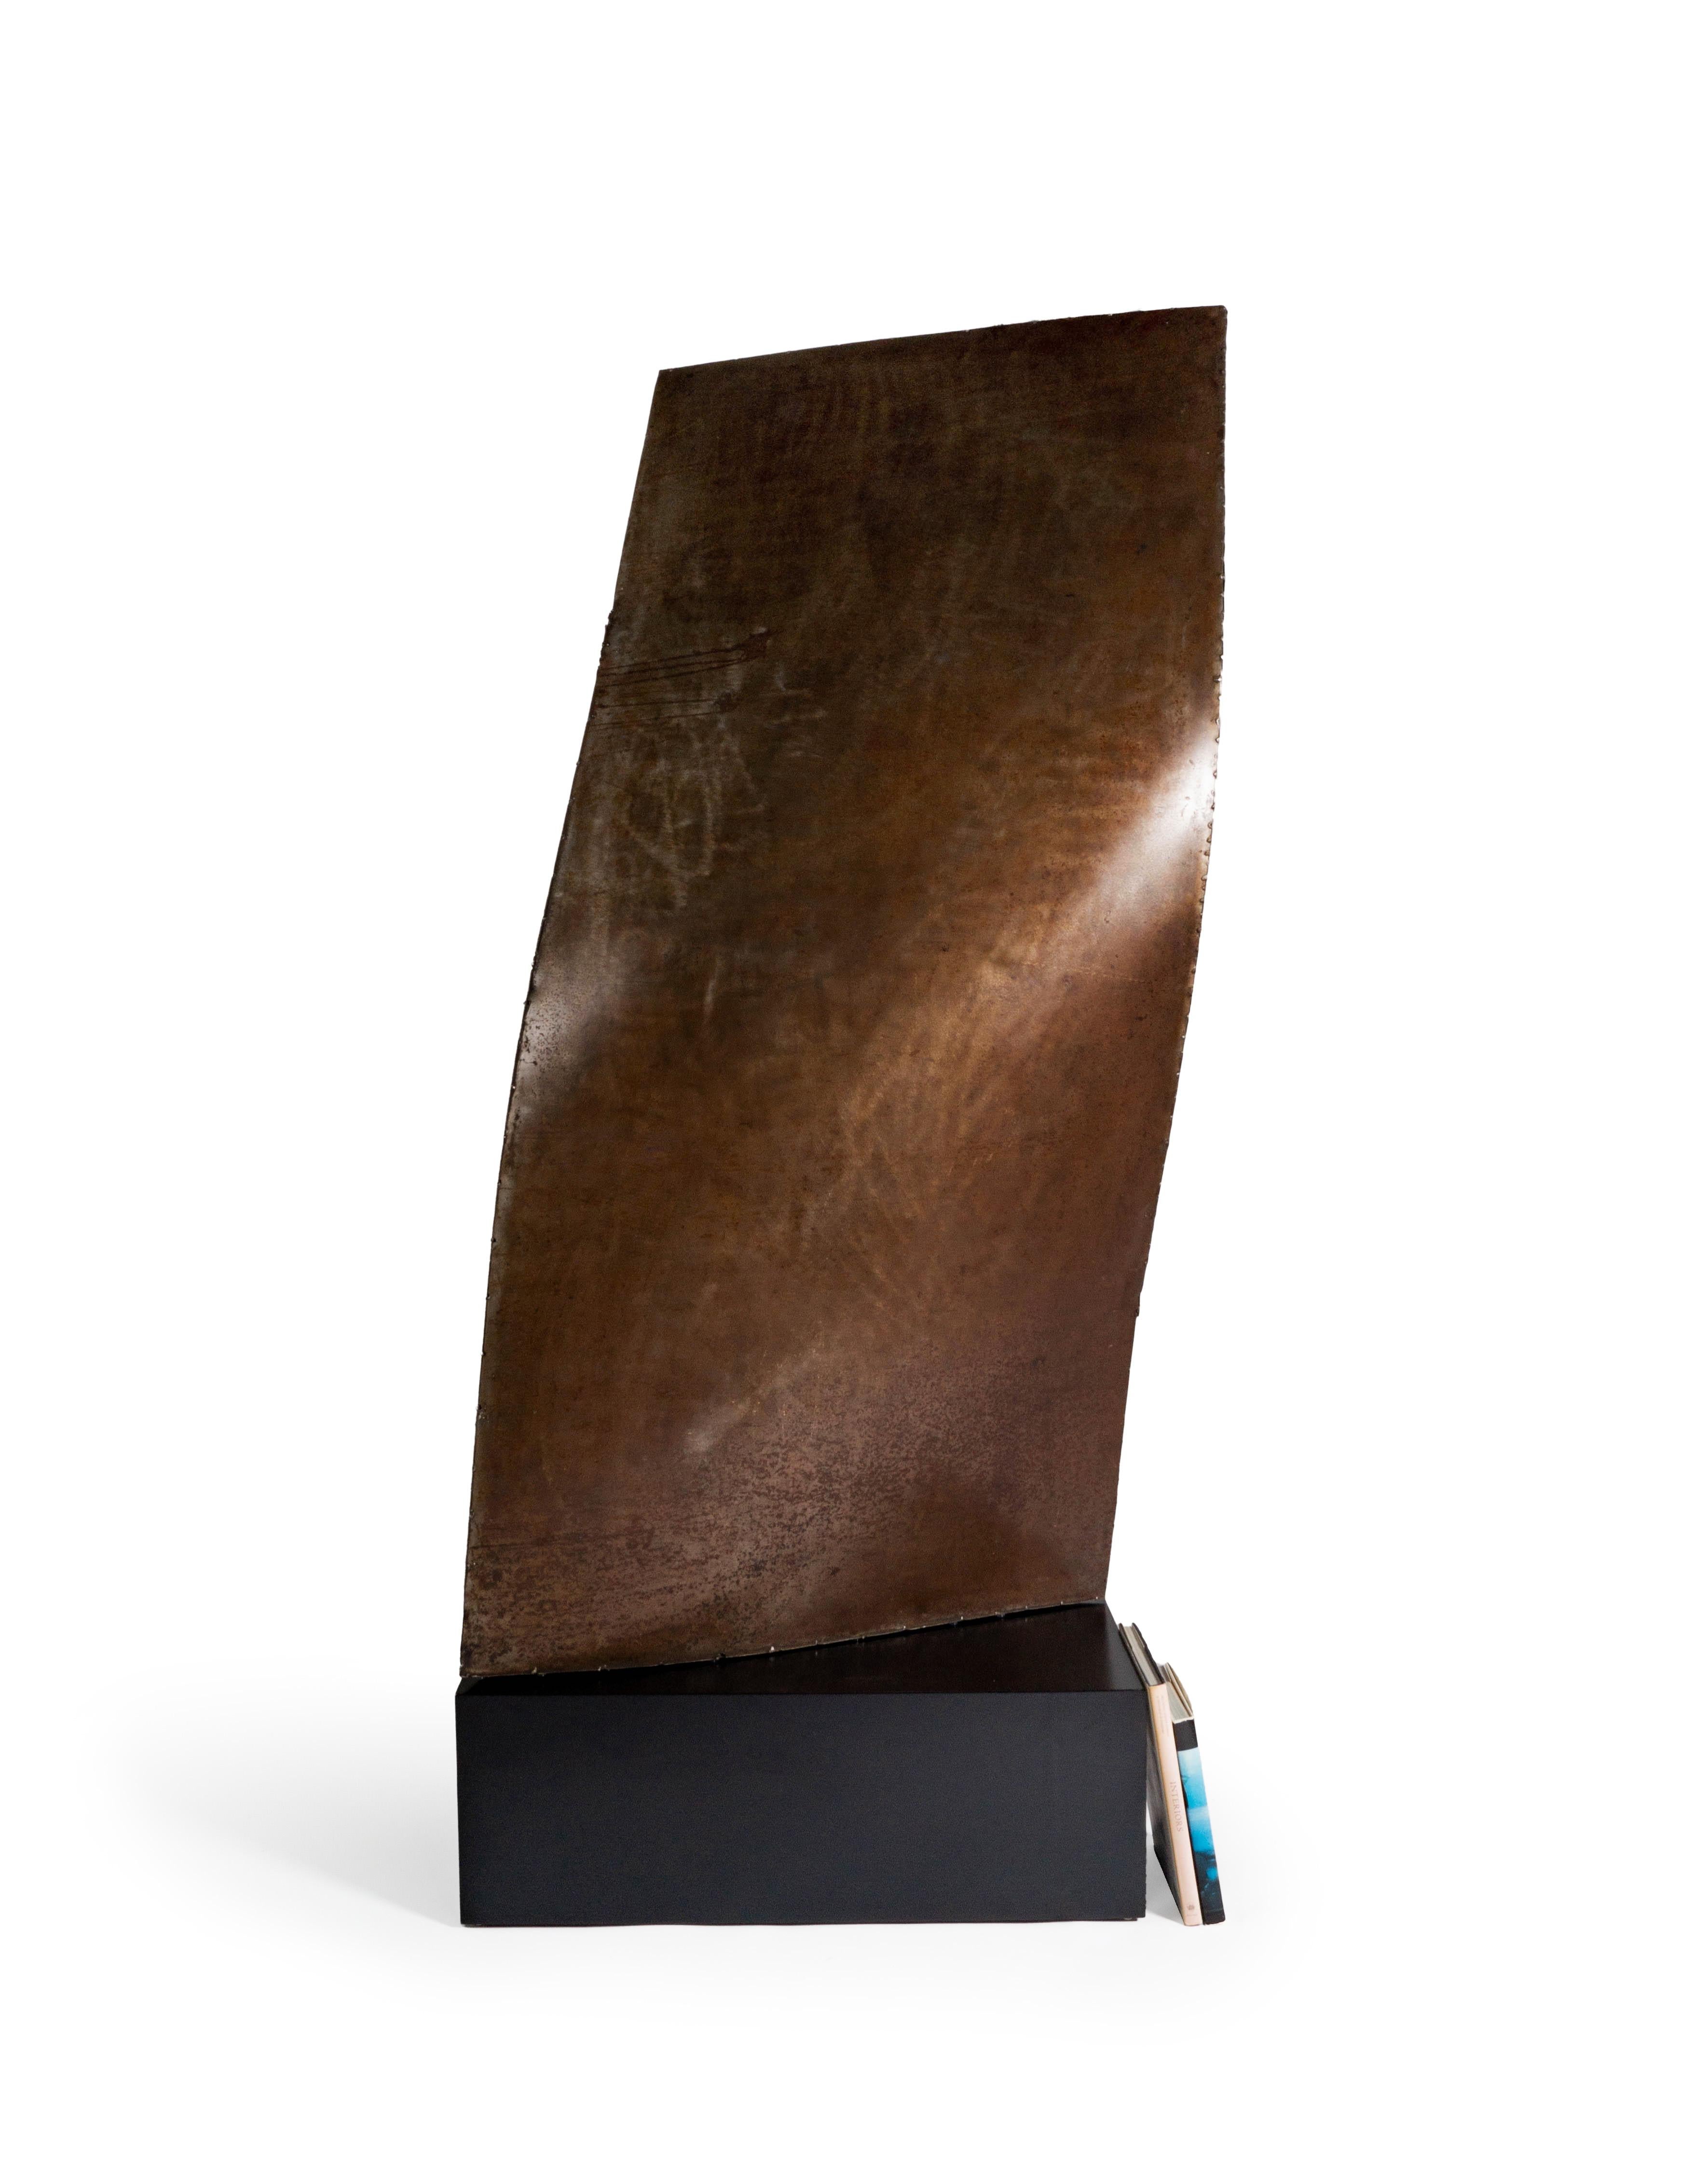 French 1960s Contemporary Metal Sculpture 

This piece is a part of Brendan Bass’s one-of-a-kind collection, Le Monde. French for “The World”, the Le Monde collection is made up of rare and hard to find pieces curated by Brendan from estate sales,